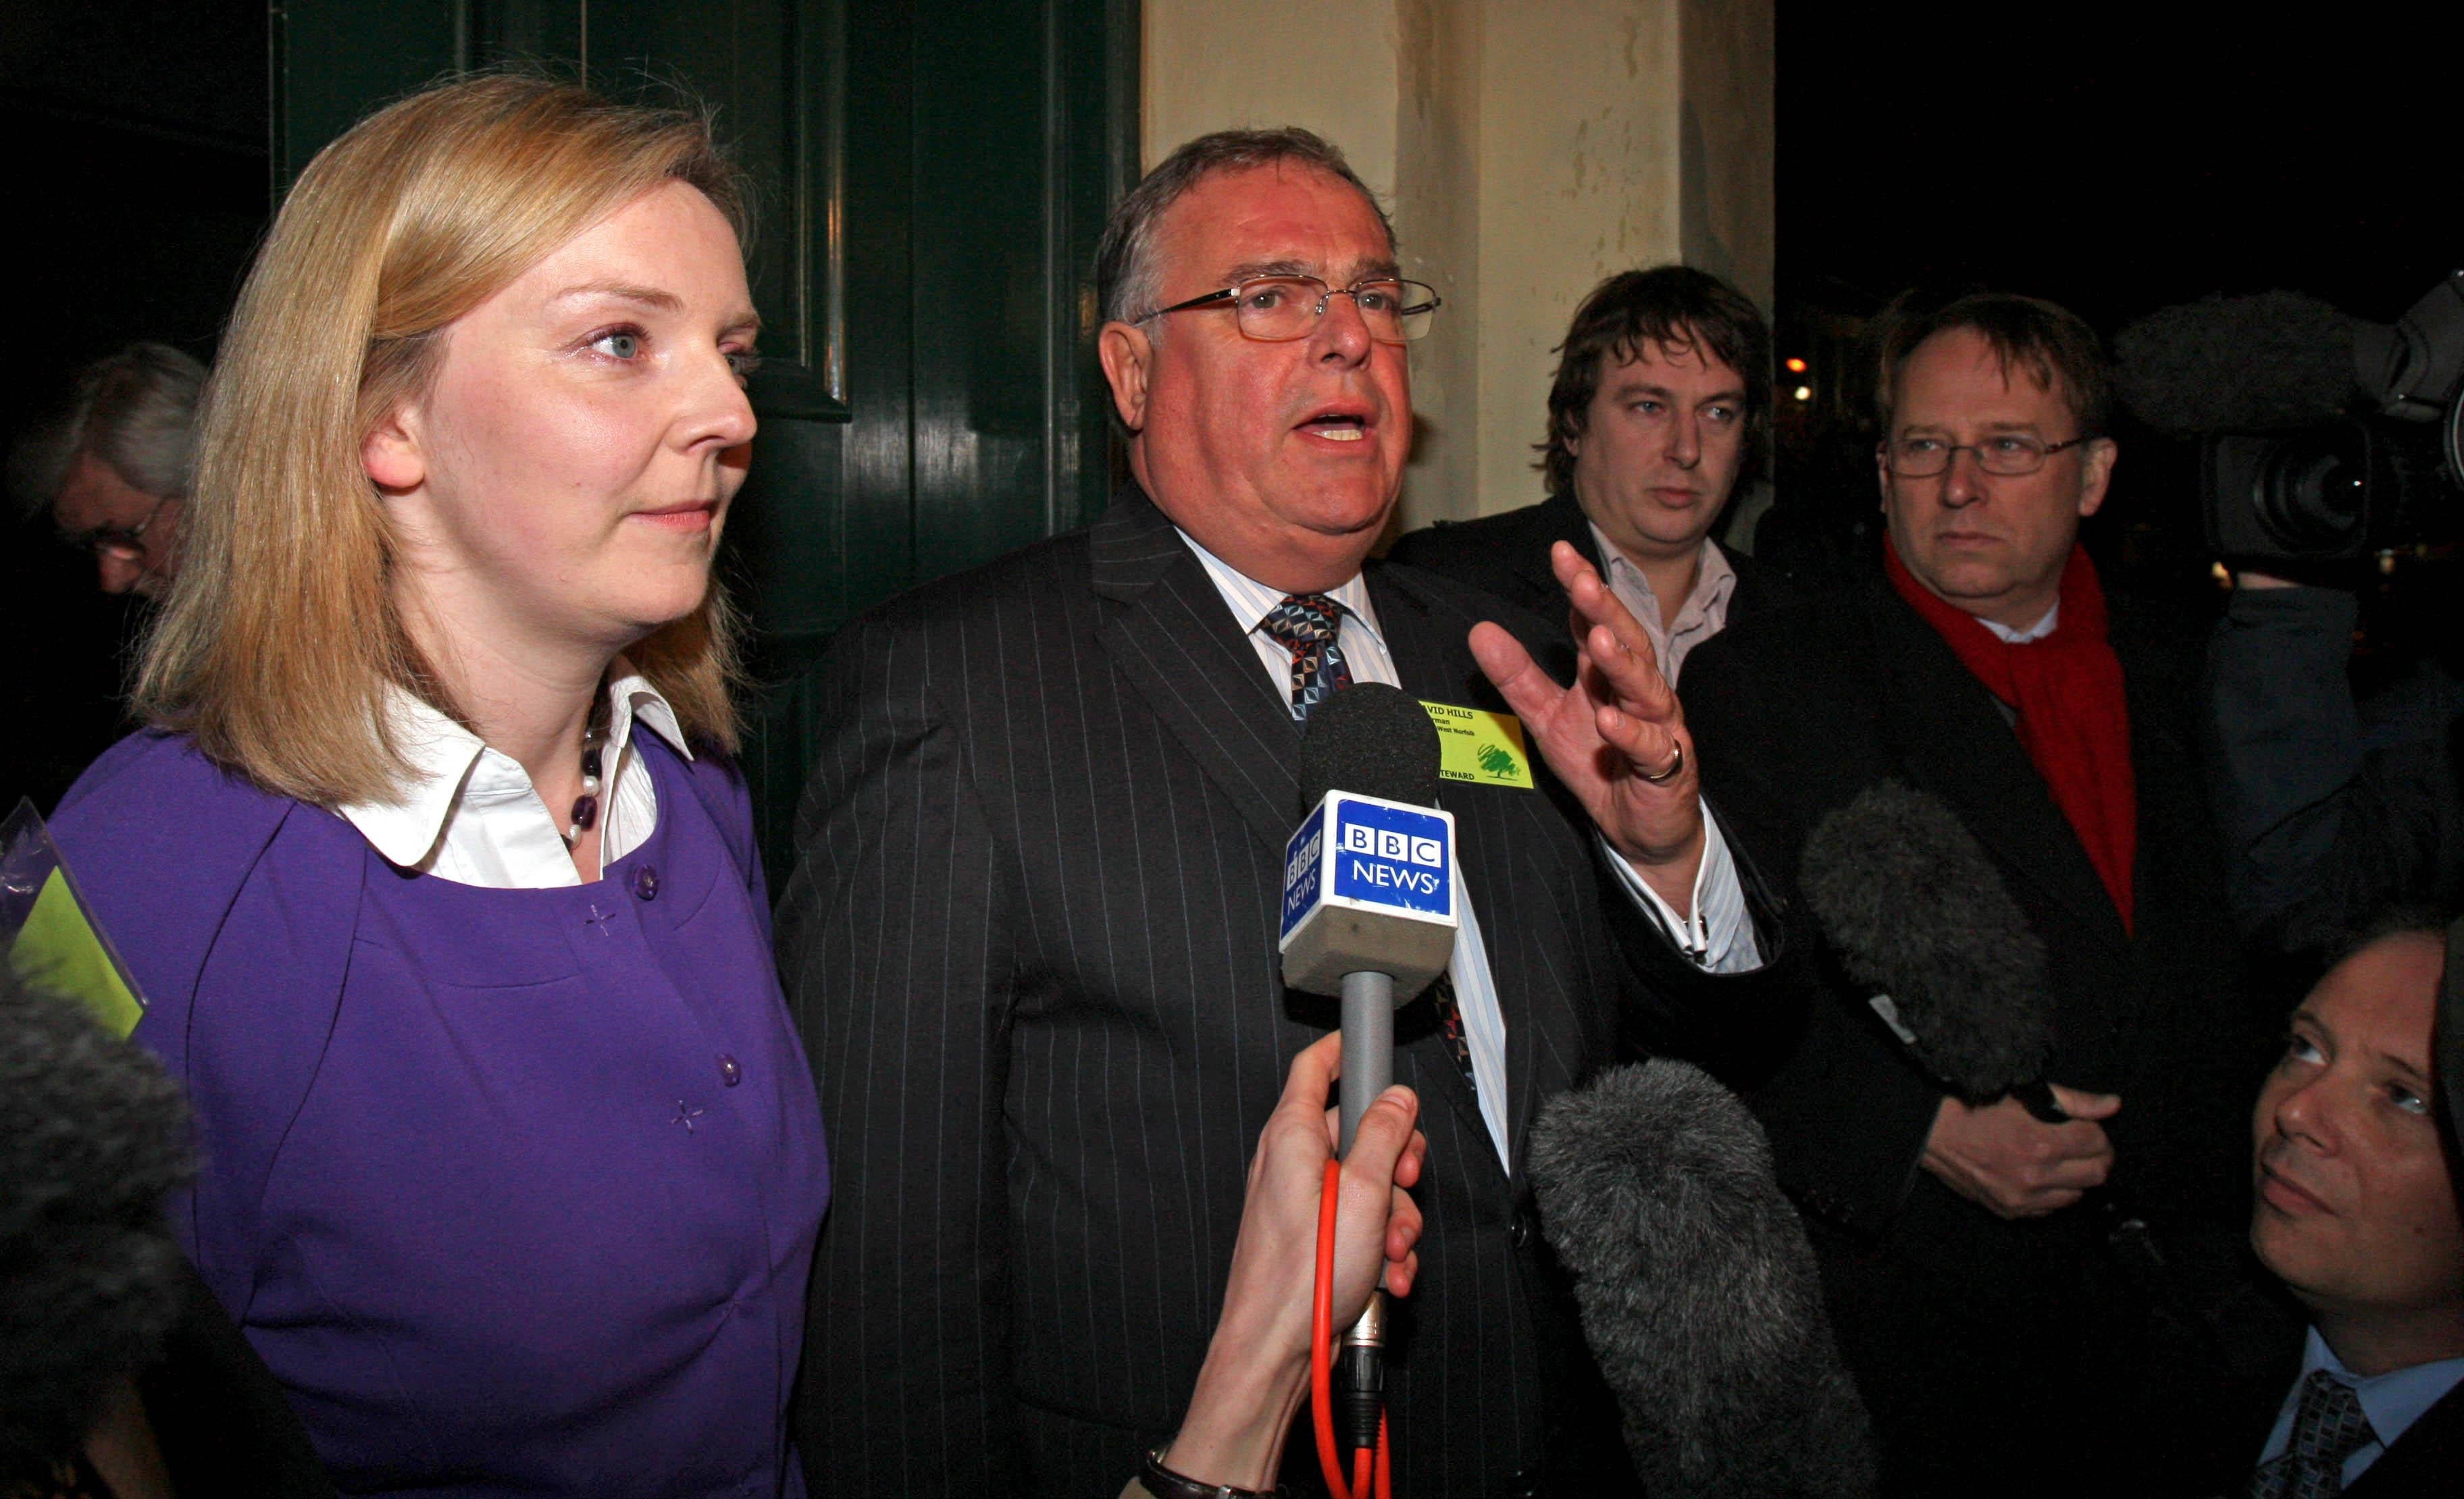 Conservative Party chair for South West Norfolk David Hills speaking to the media alongside Truss during her 2009 battle against deselection